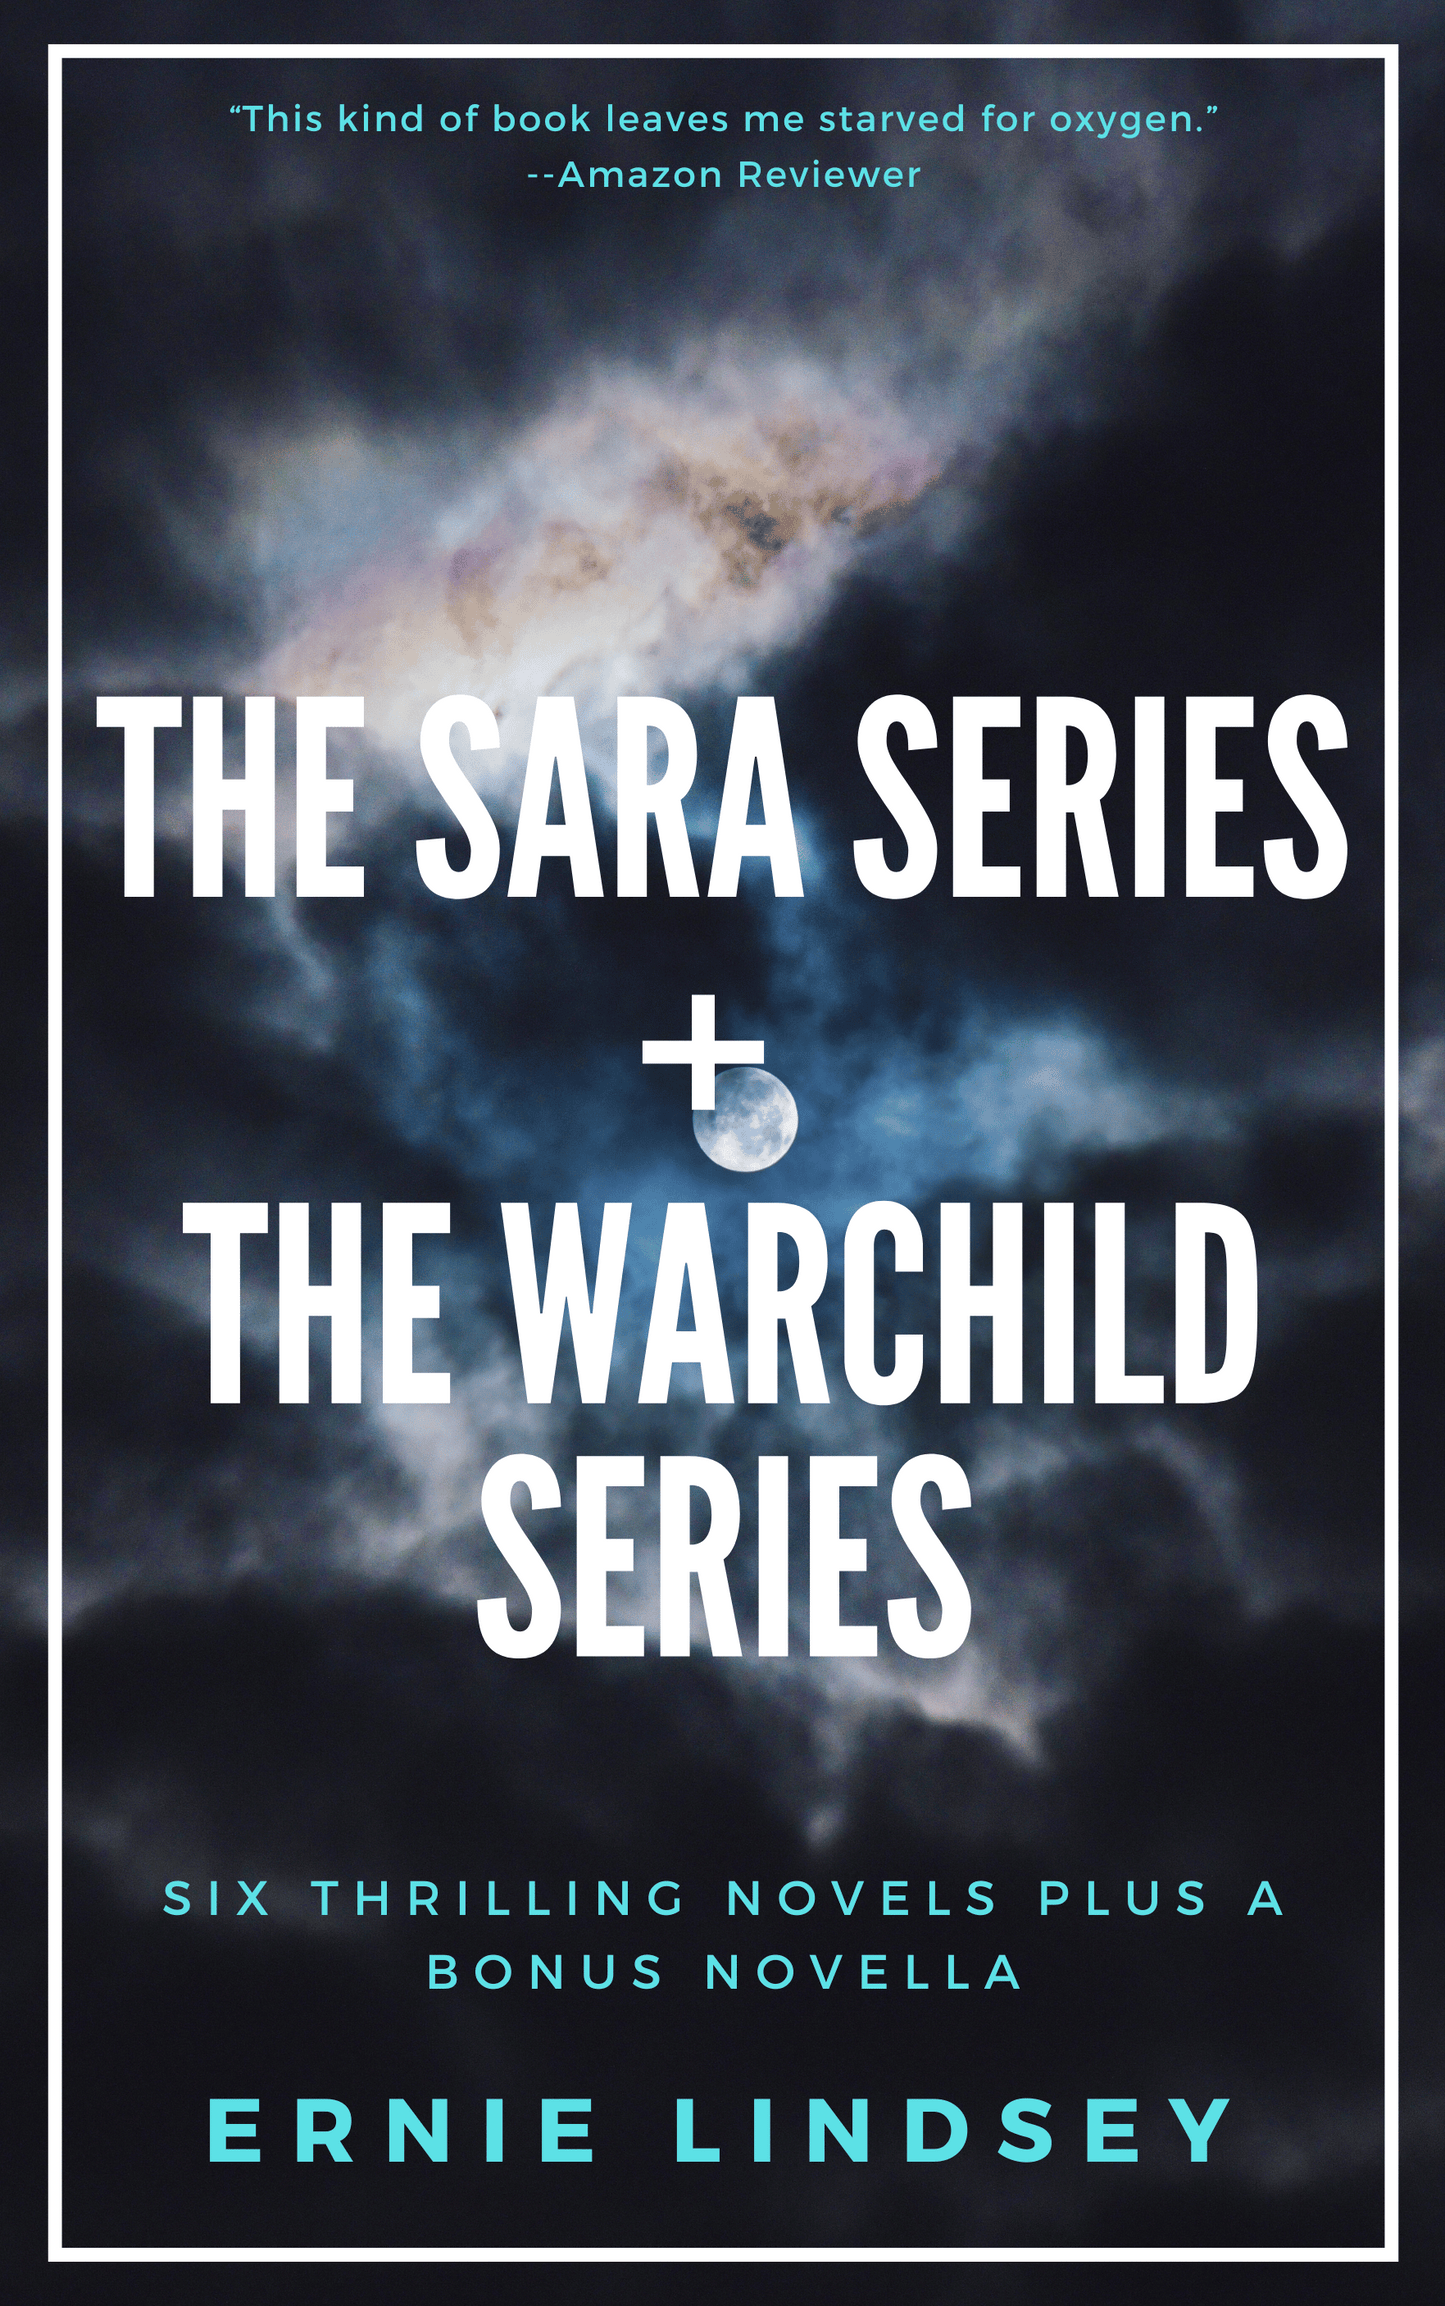 The Sara Series + The Warchild Series